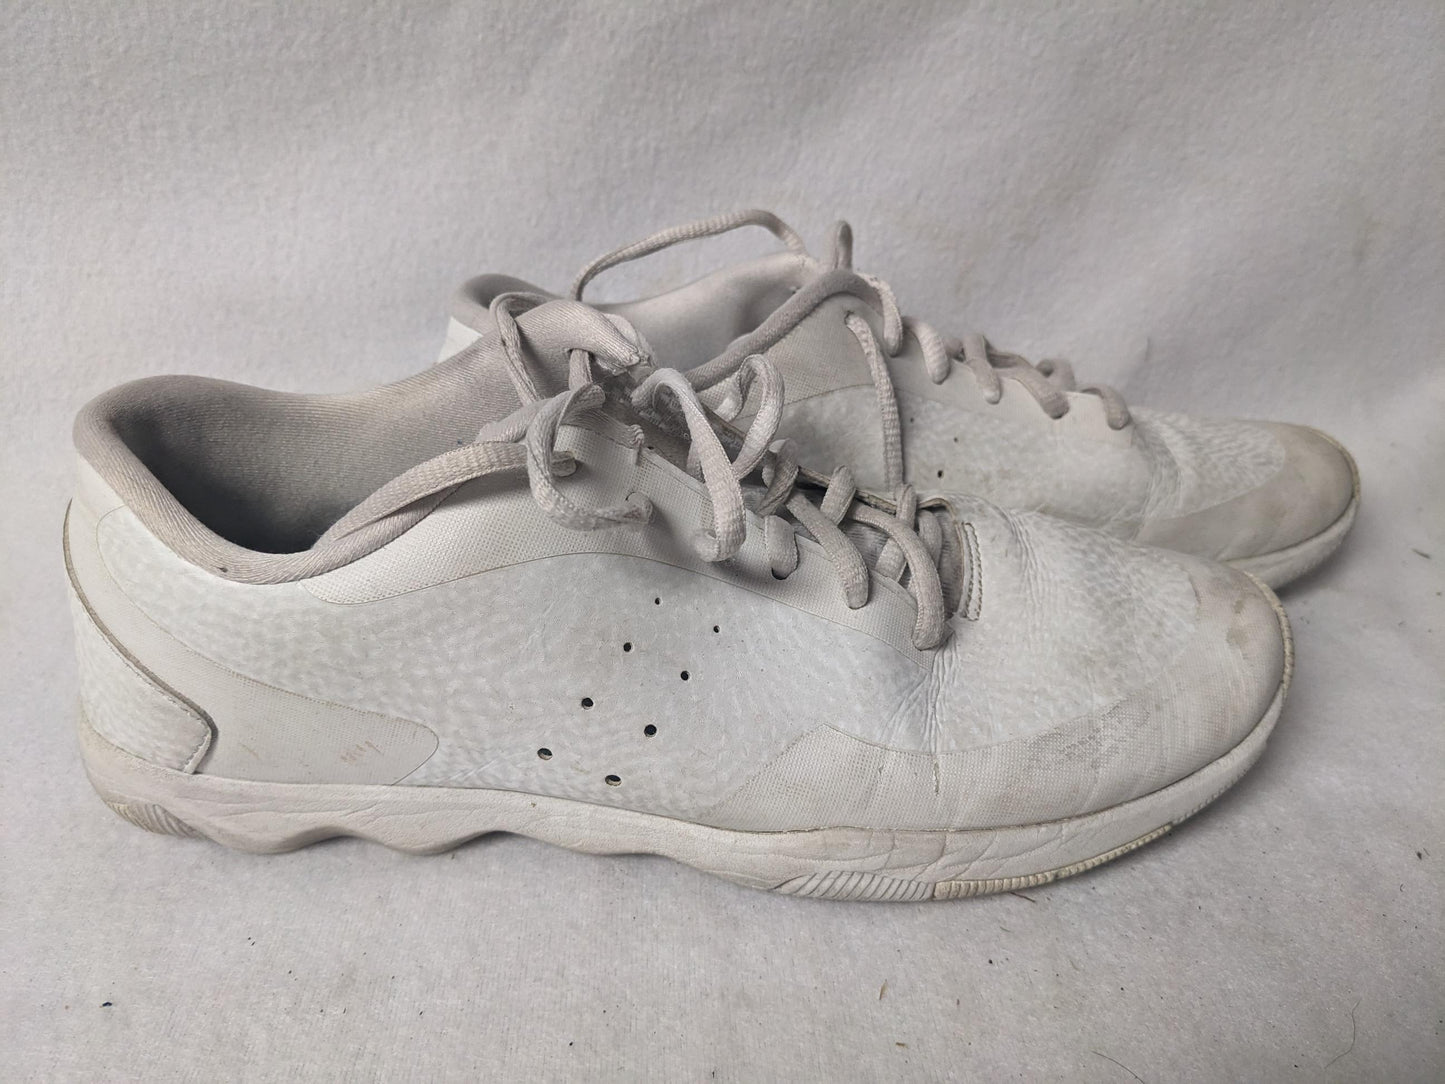 Kaepa Women's Athletic Shoes Size Women's 10 Color White Condition Used